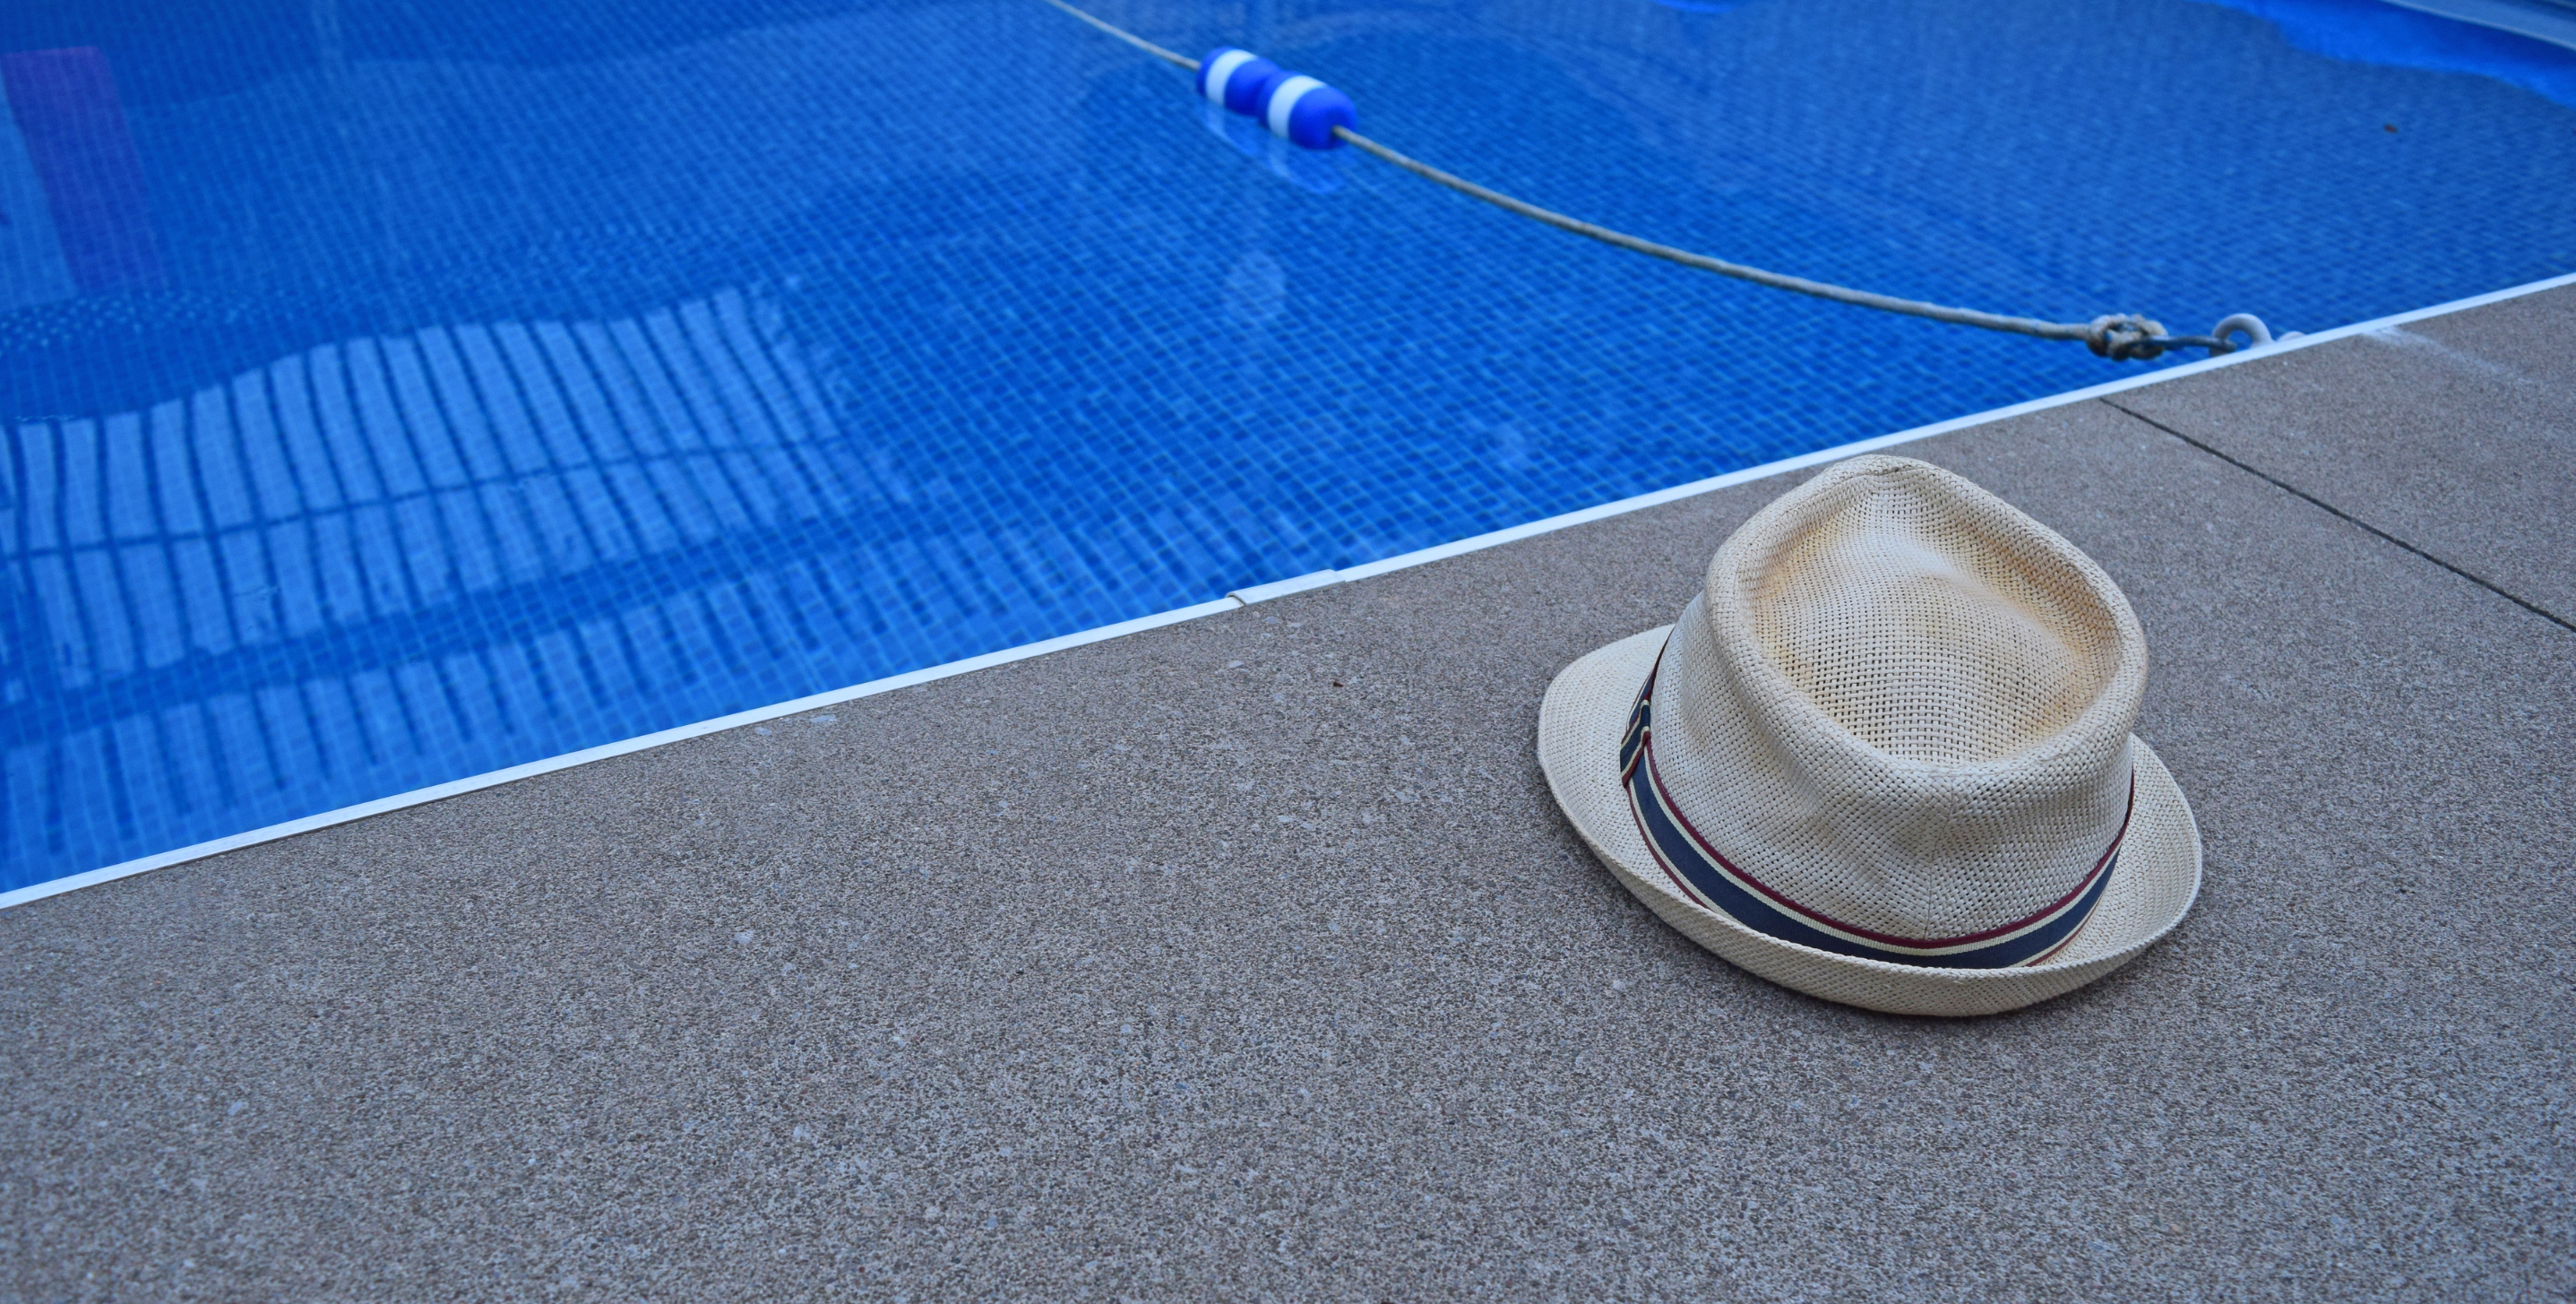 Pool Deck Coatings A Splash of Style and Durability